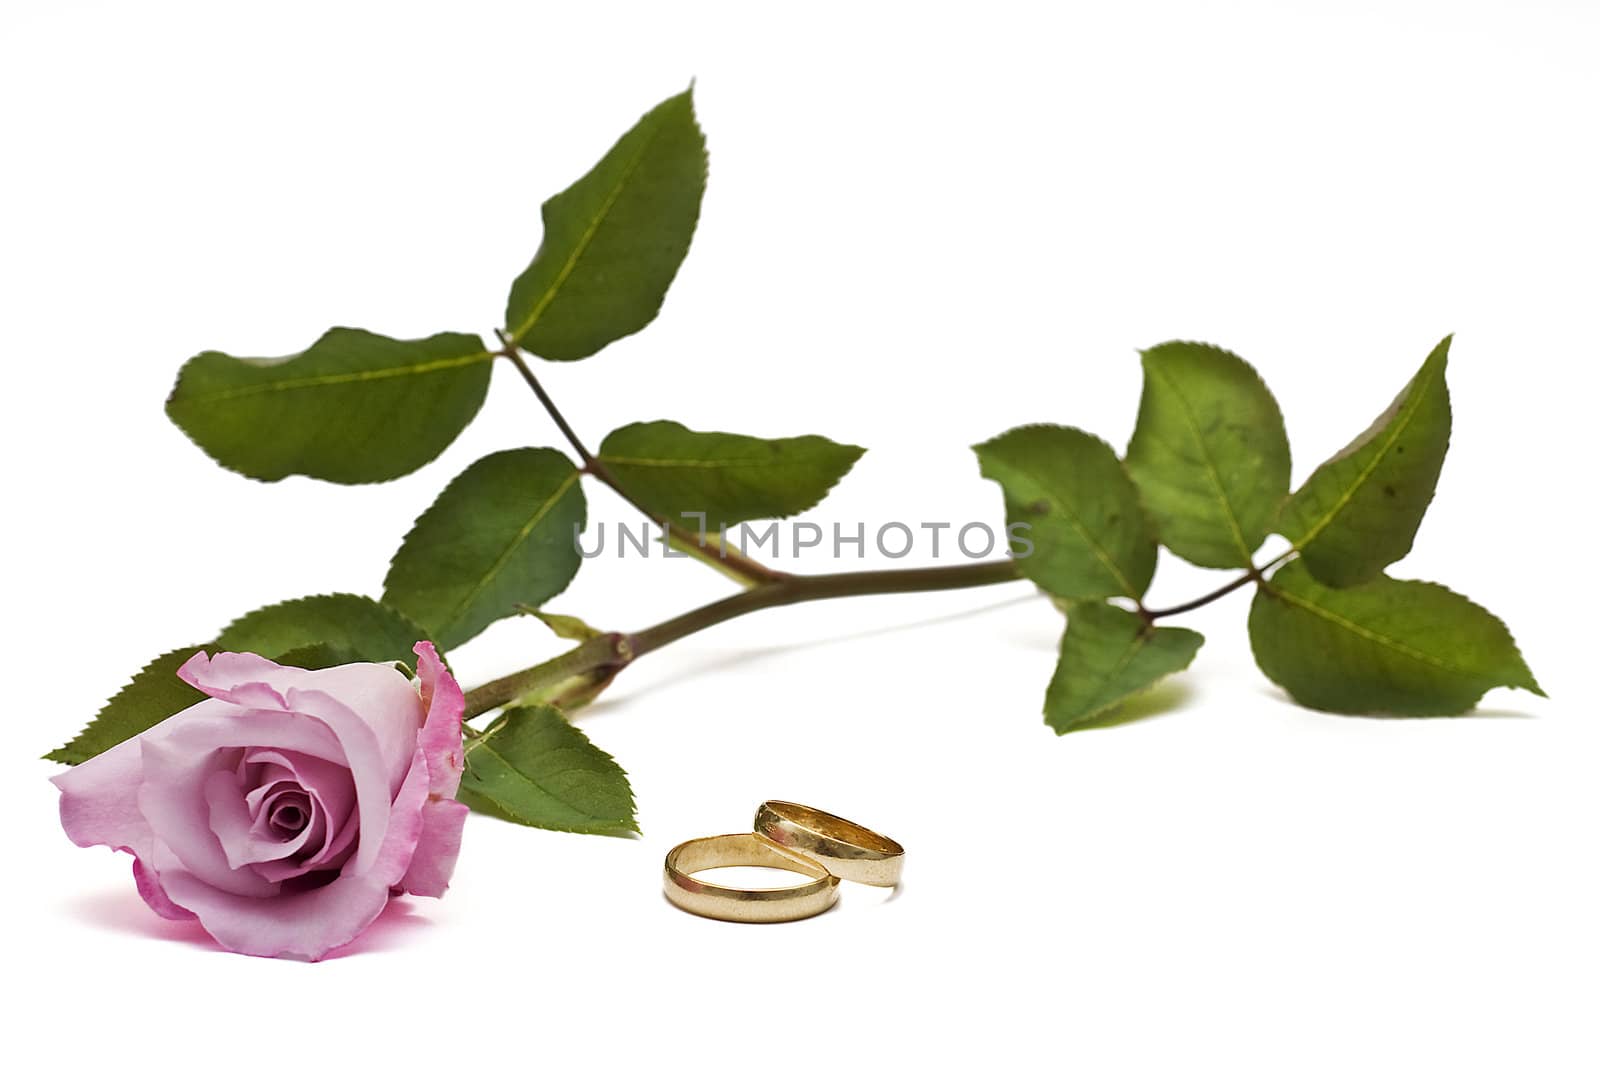 Golden wedding rings and fresh roses to say I love you.